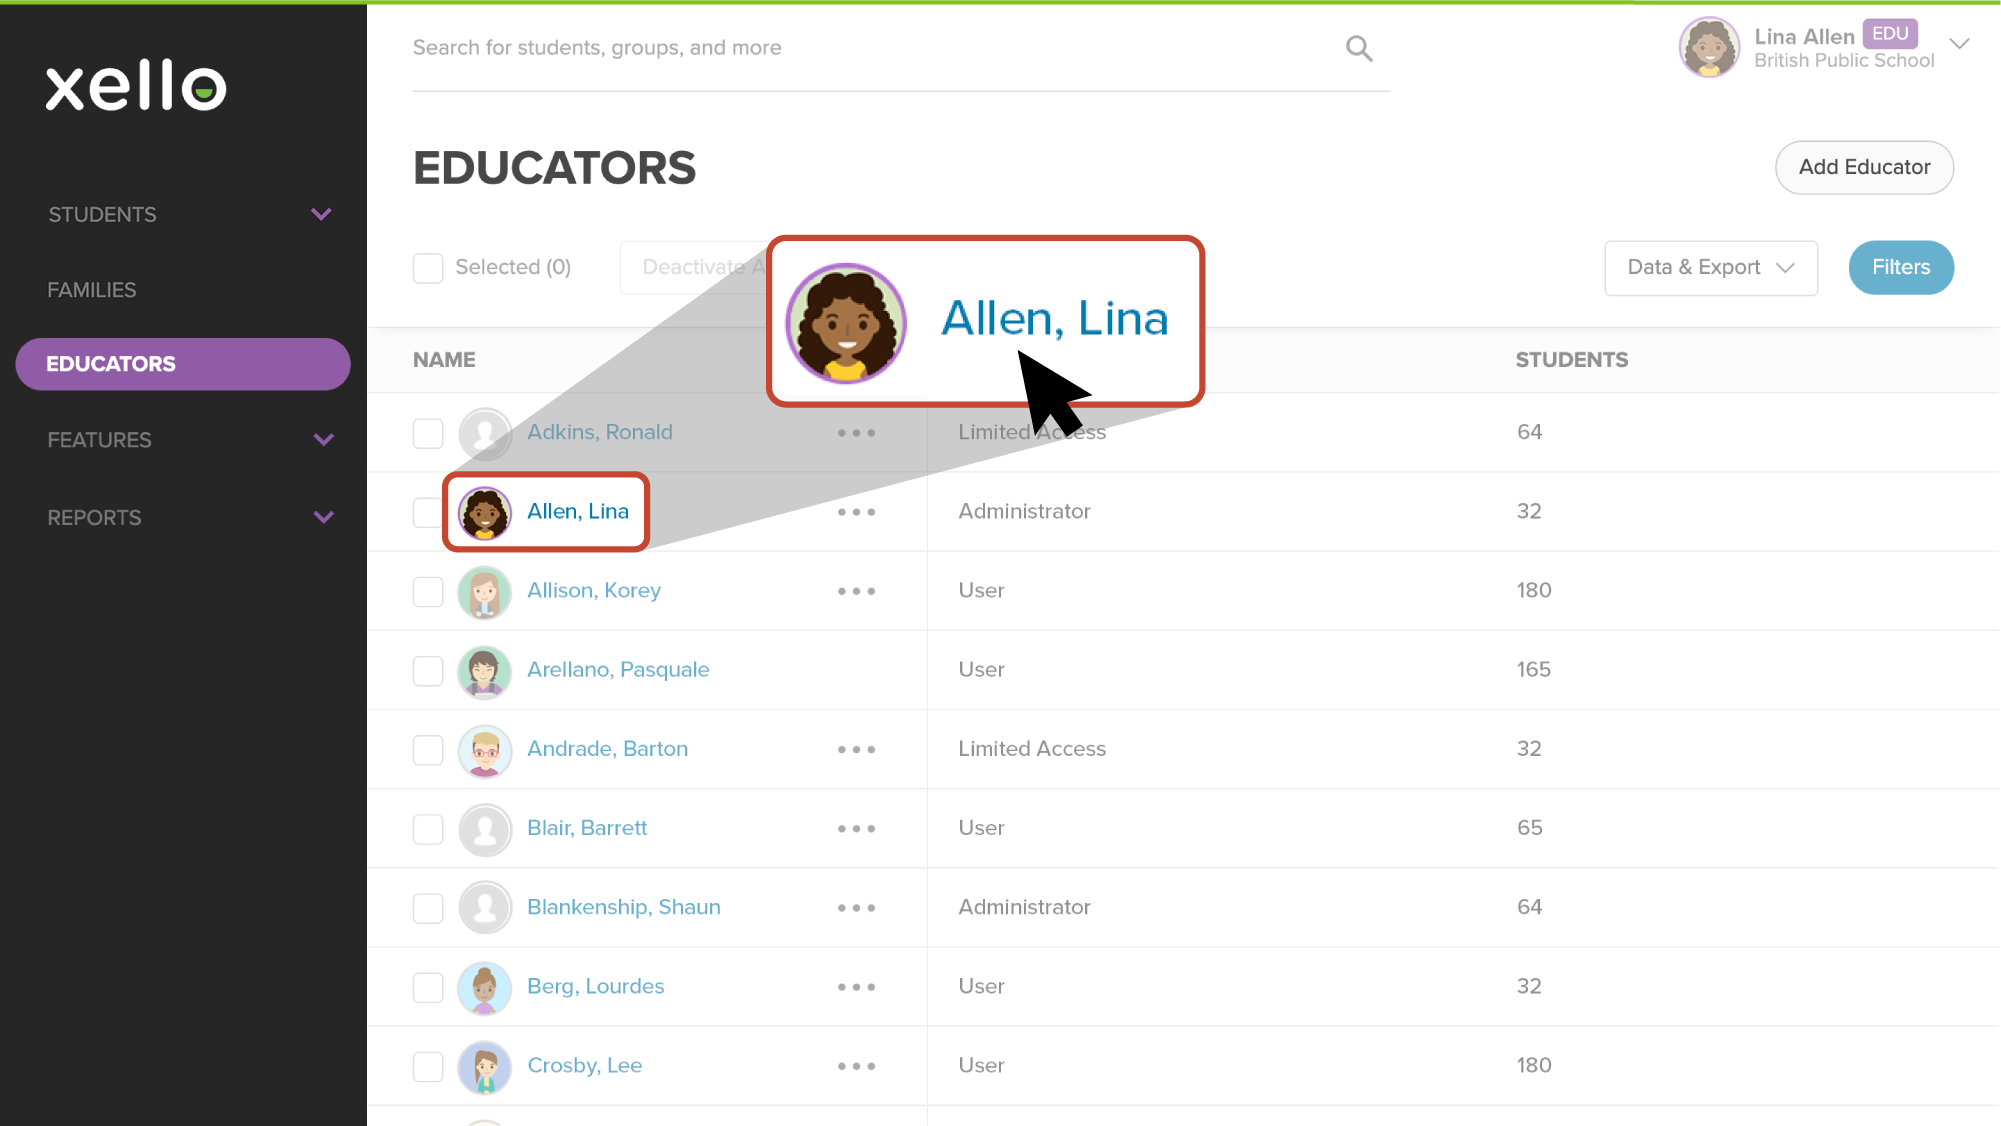 Educators list open. An educator named Allen, Lina is highlighted